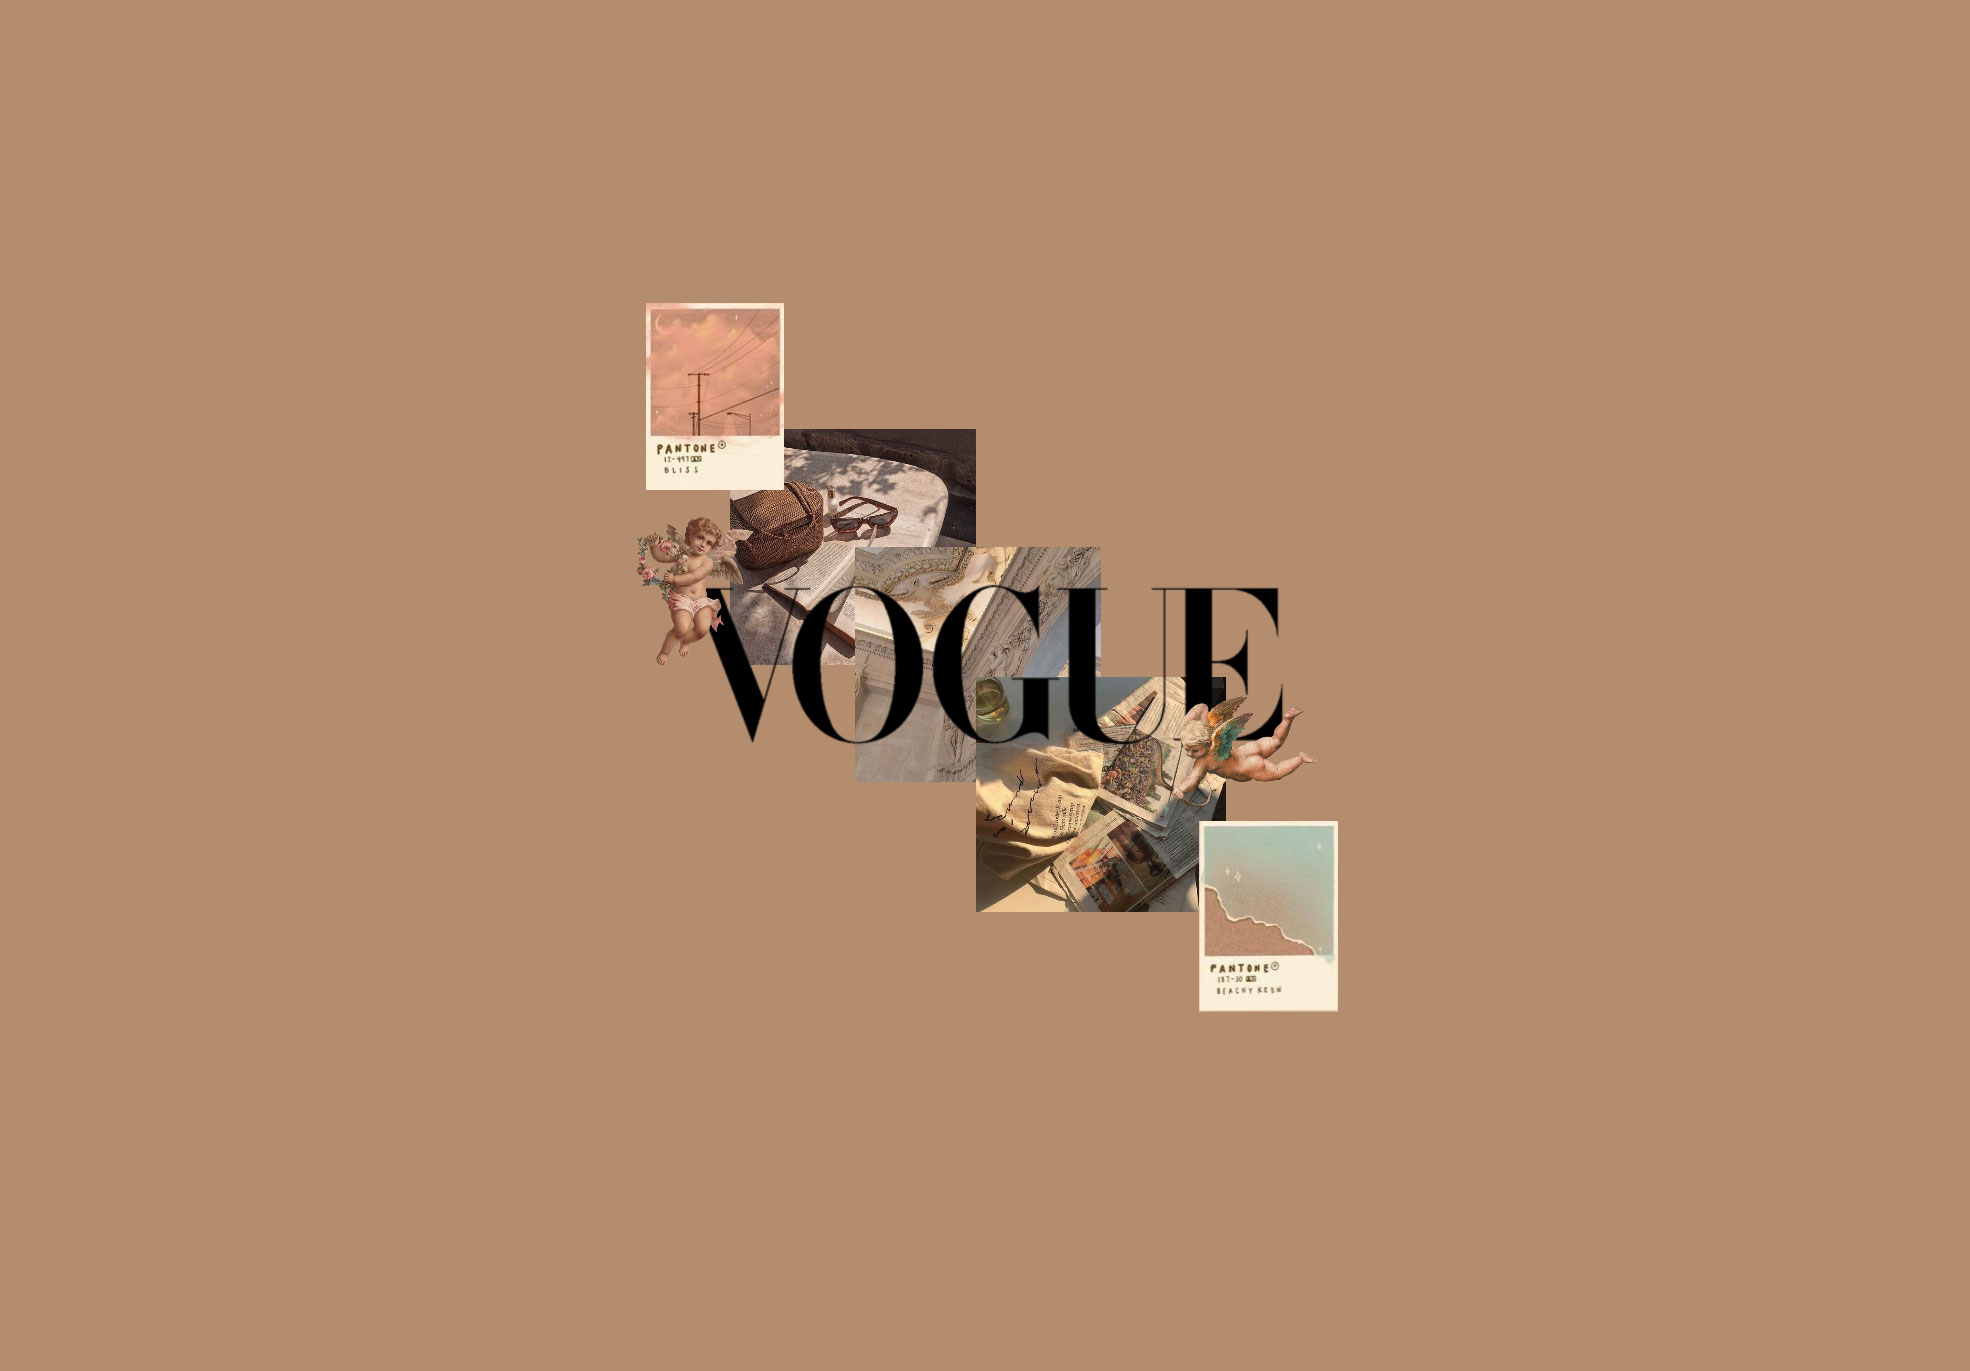 25 Brown Aesthetic Wallpaper for Laptop : Vogue, Angle & Pantone